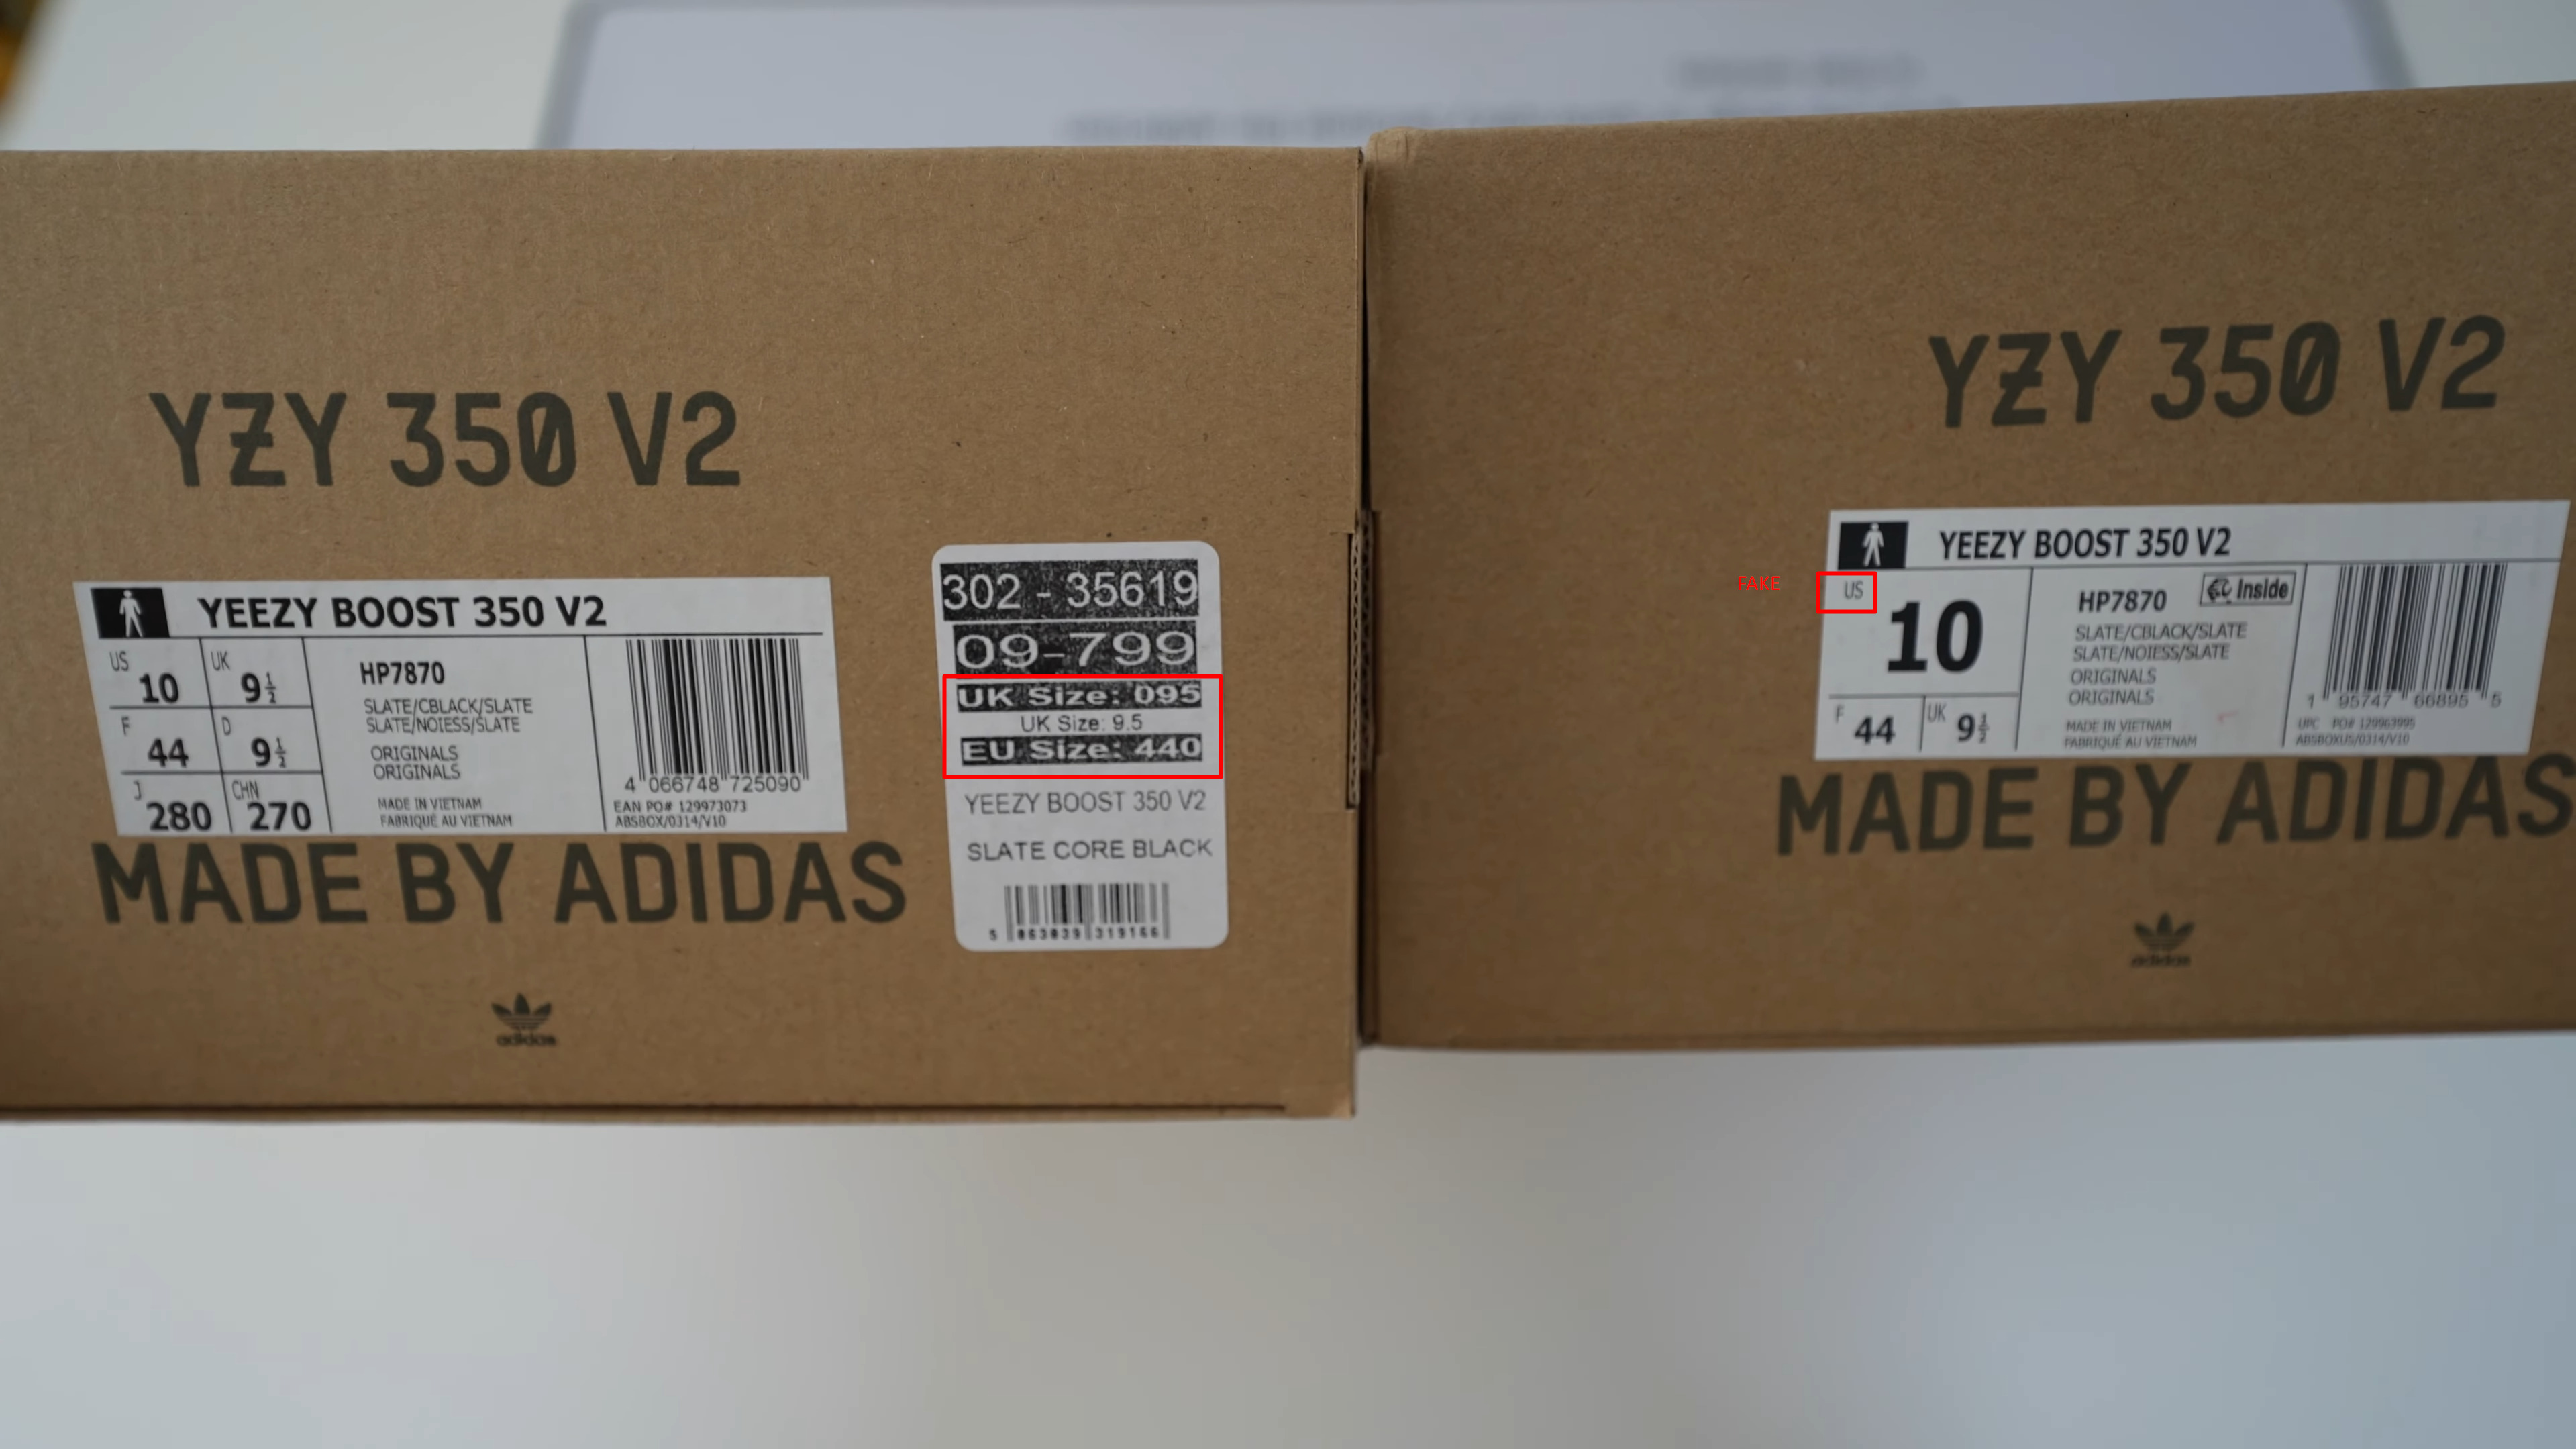 The Real Yeezy 350 is from UK, EU Size. The Fake YZY 350 V2 come from US